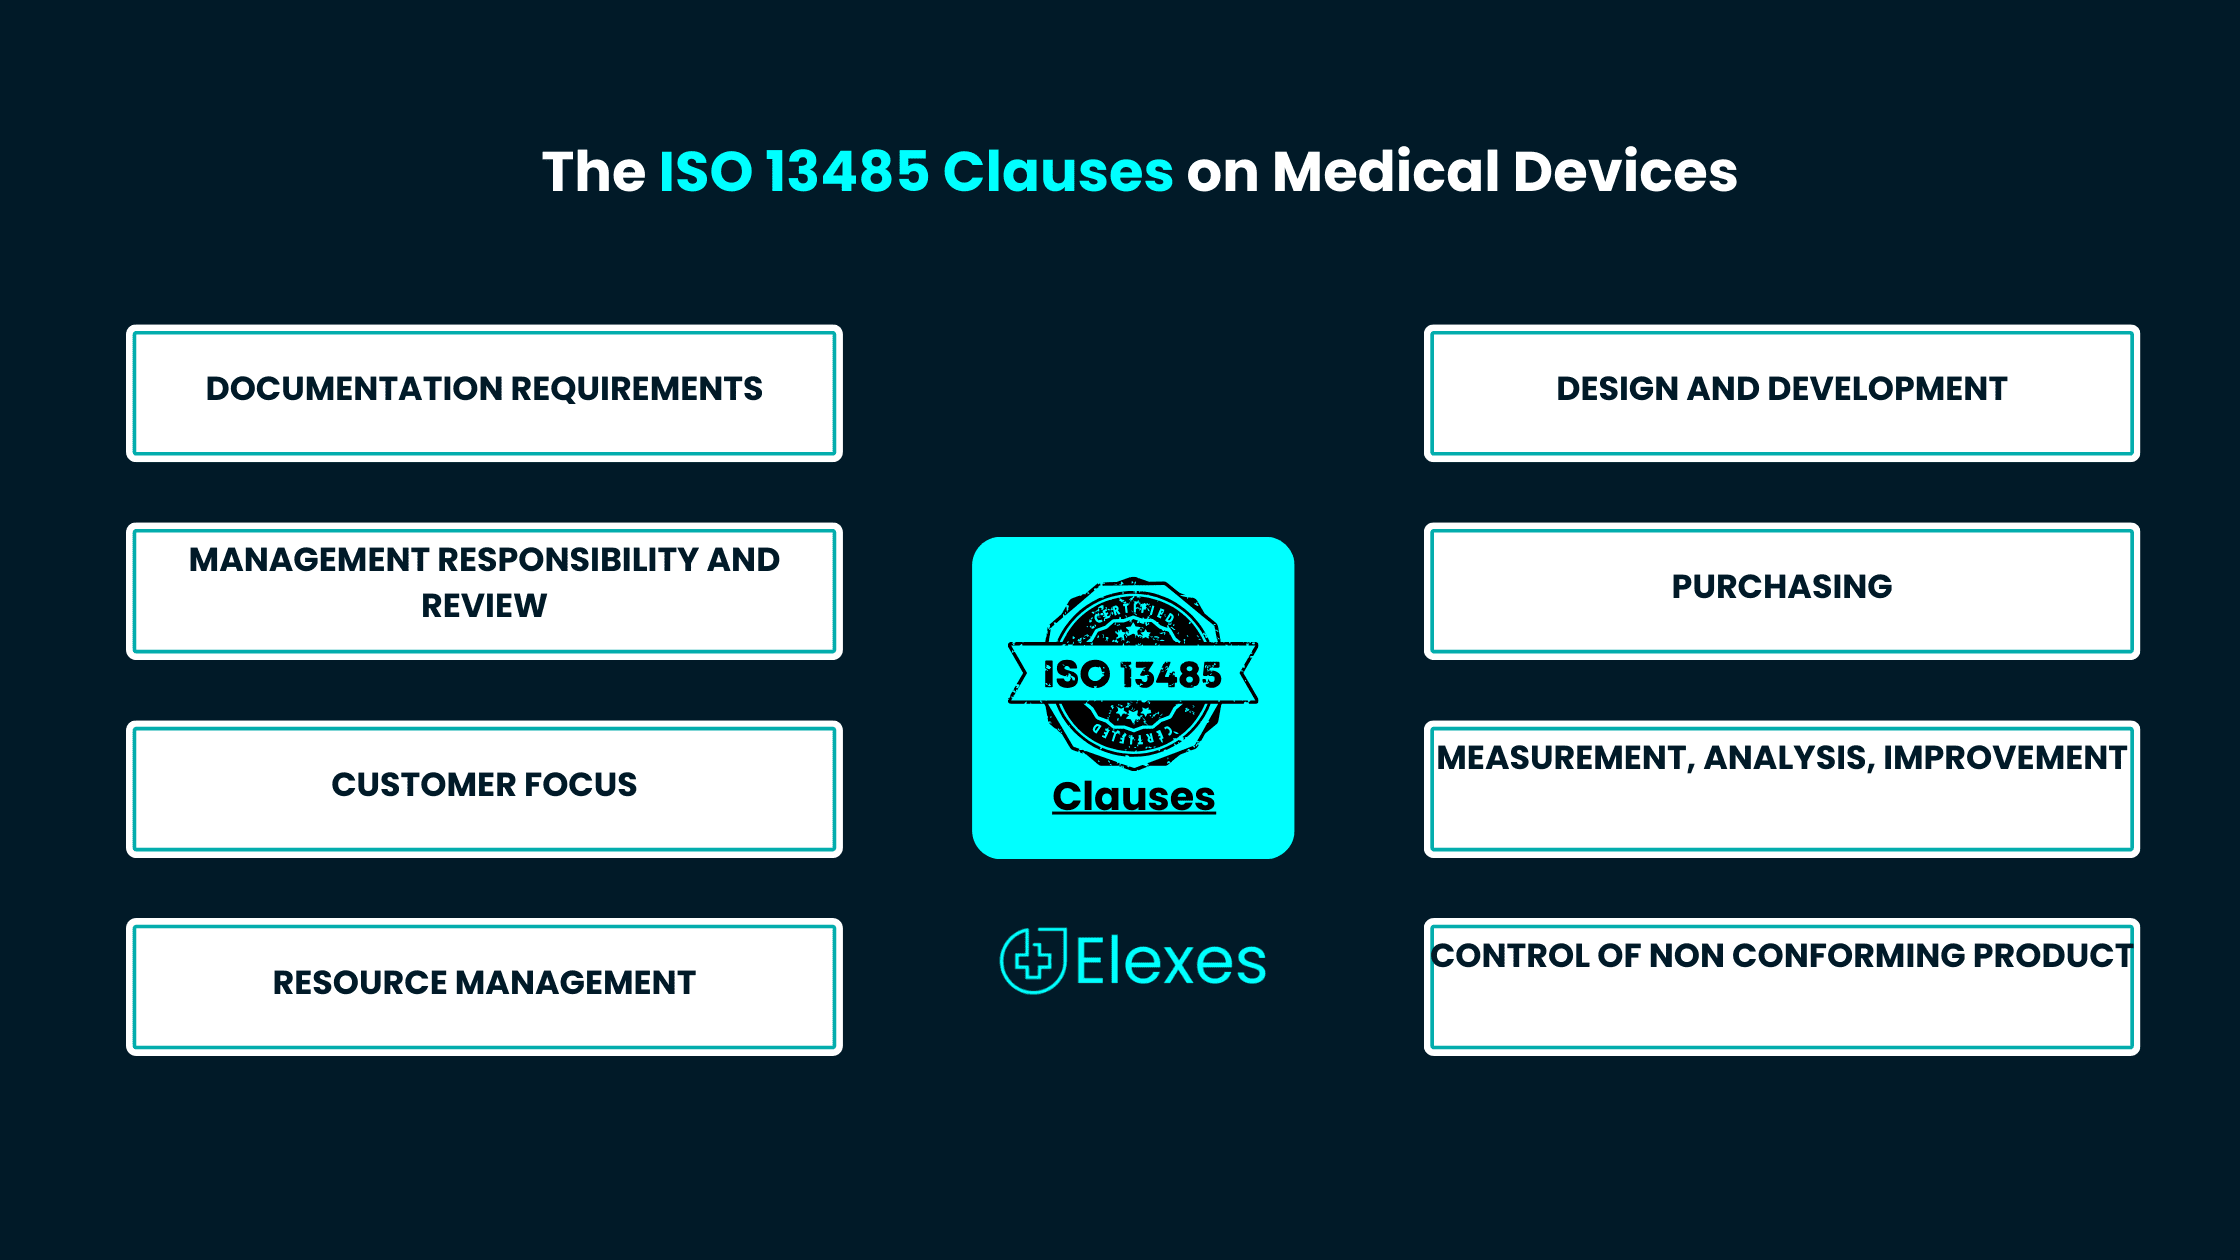 The ISO 13485 Clauses on Medical Devices